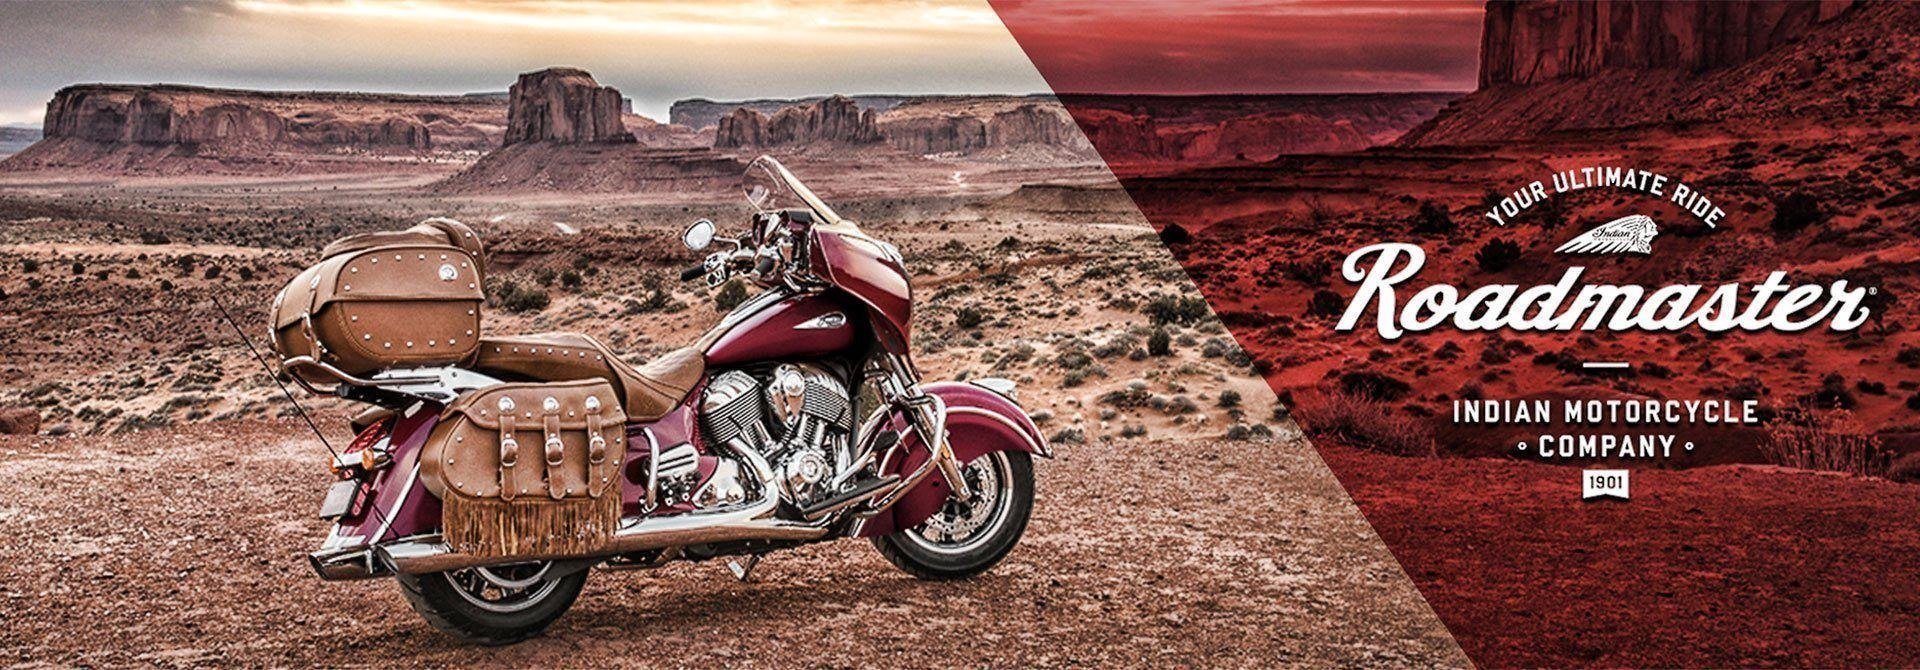 New & Used Indian Motorcycles for Sale - ElkhartIndianMotorcycle.com